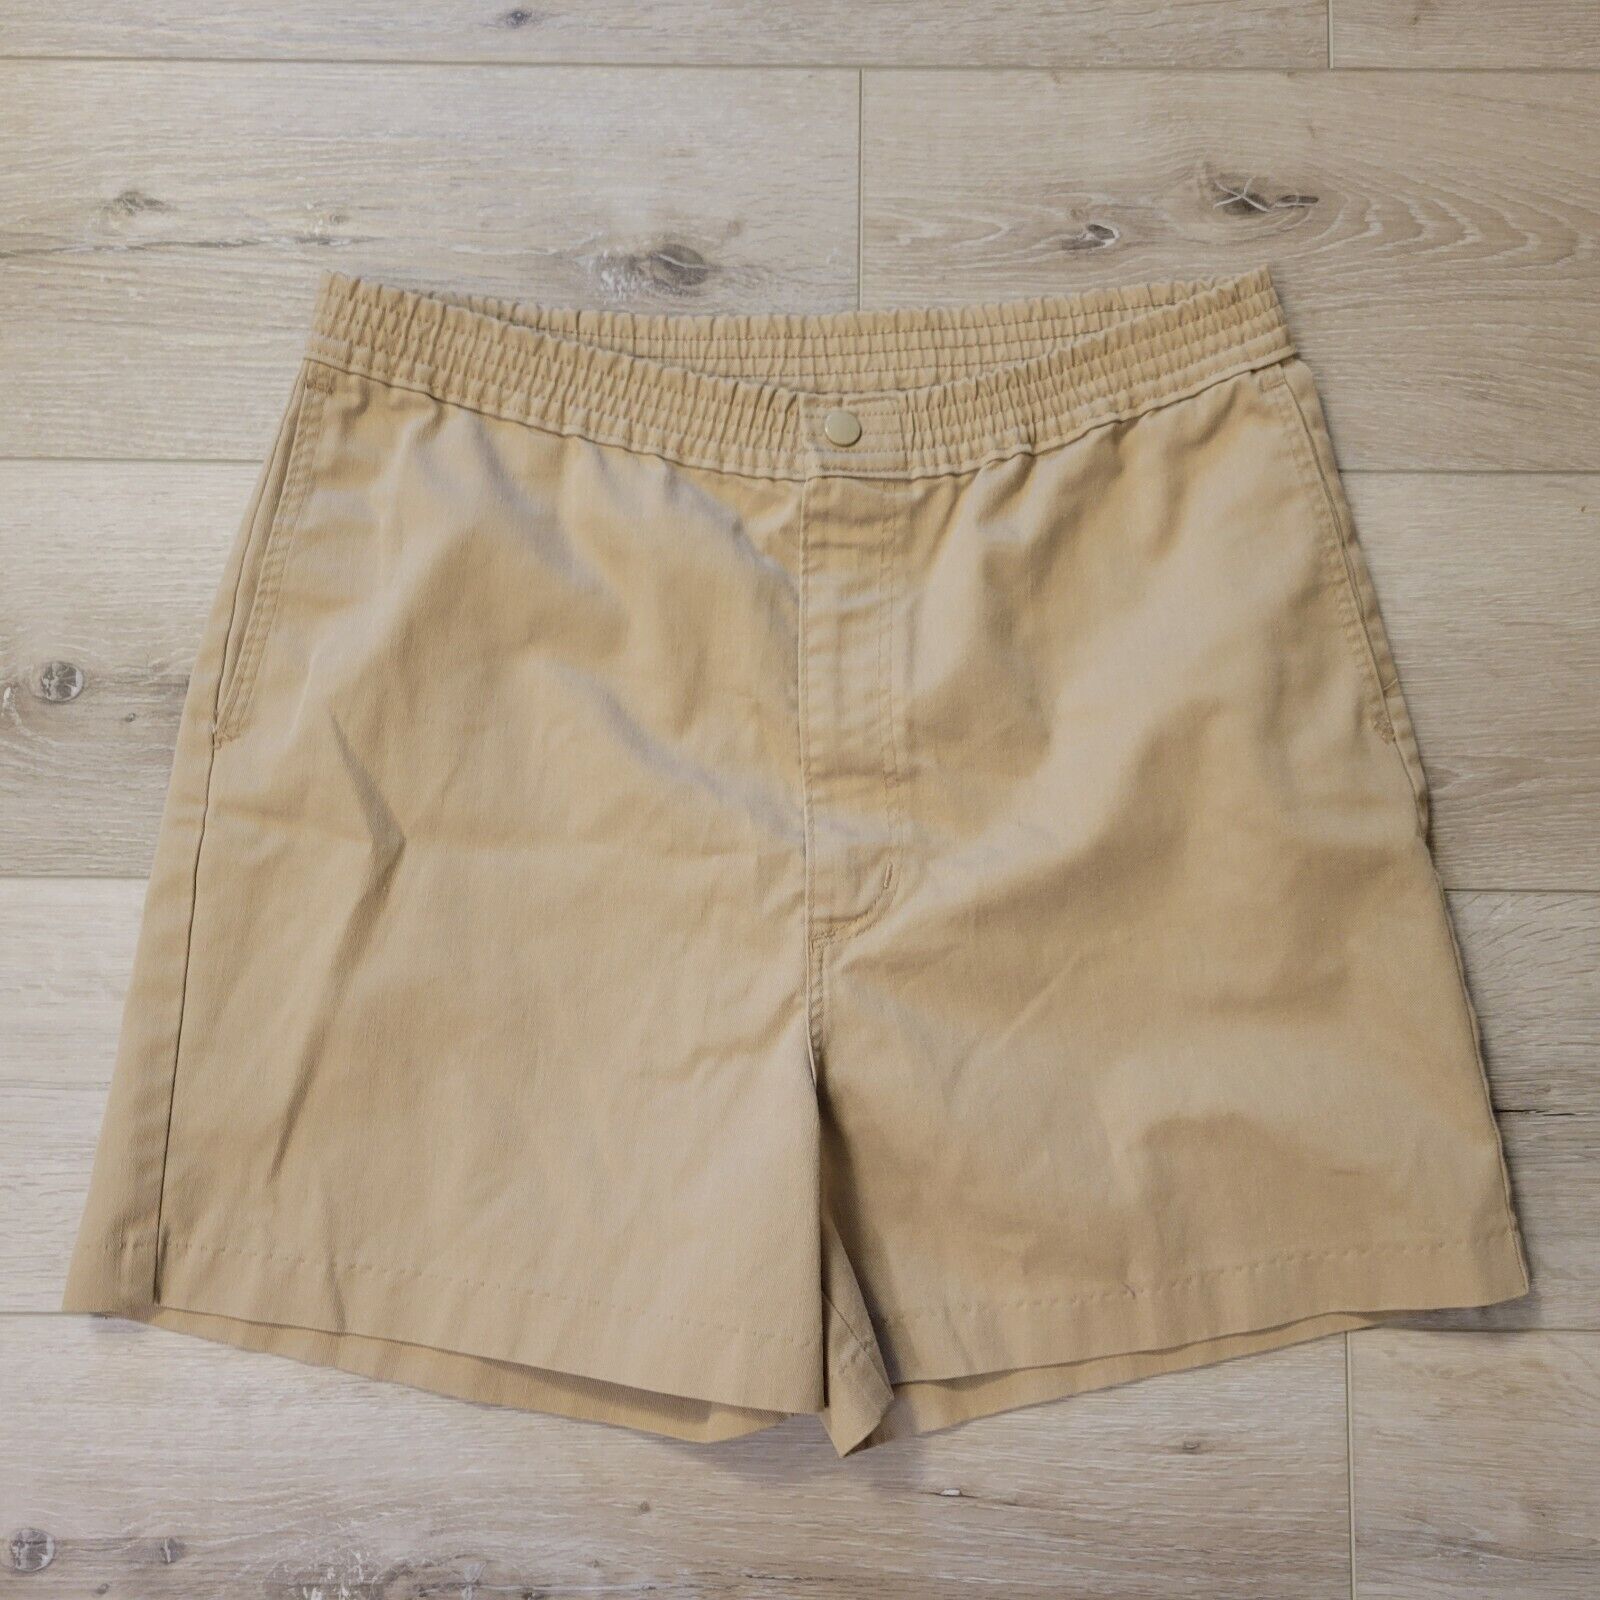 Vintage 80s Land's End Cotton TAN MADE Regular discount IN Shorts Medium LARGE Houston Mall US